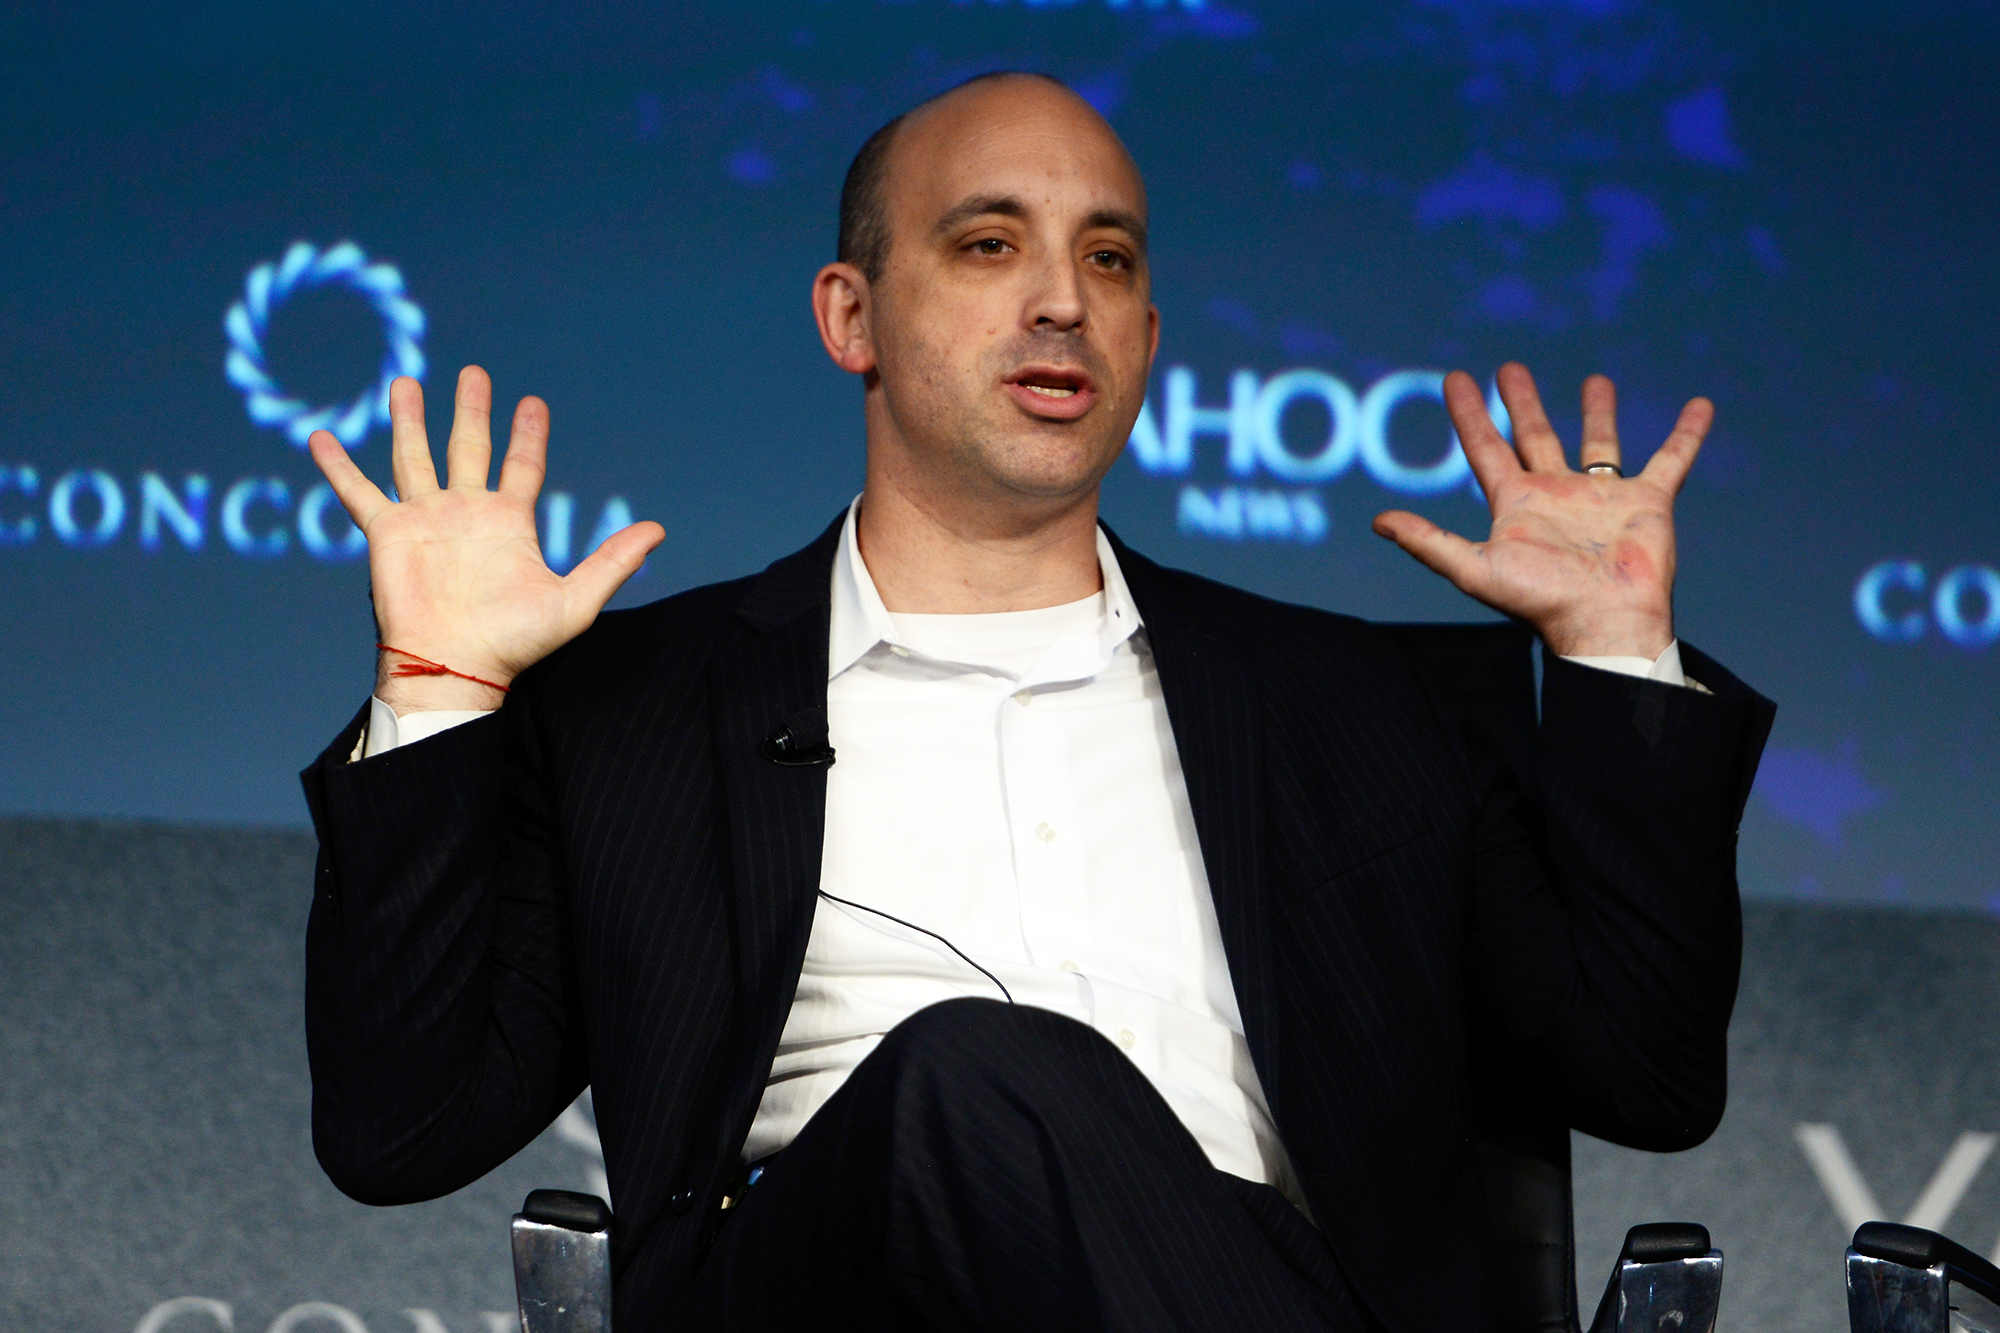 Director of the Anti-Defamation League Jonathan Greenblatt in New York City, on Oct. 2, 2015 in New York City. (Leigh Vogel—Getty Images)